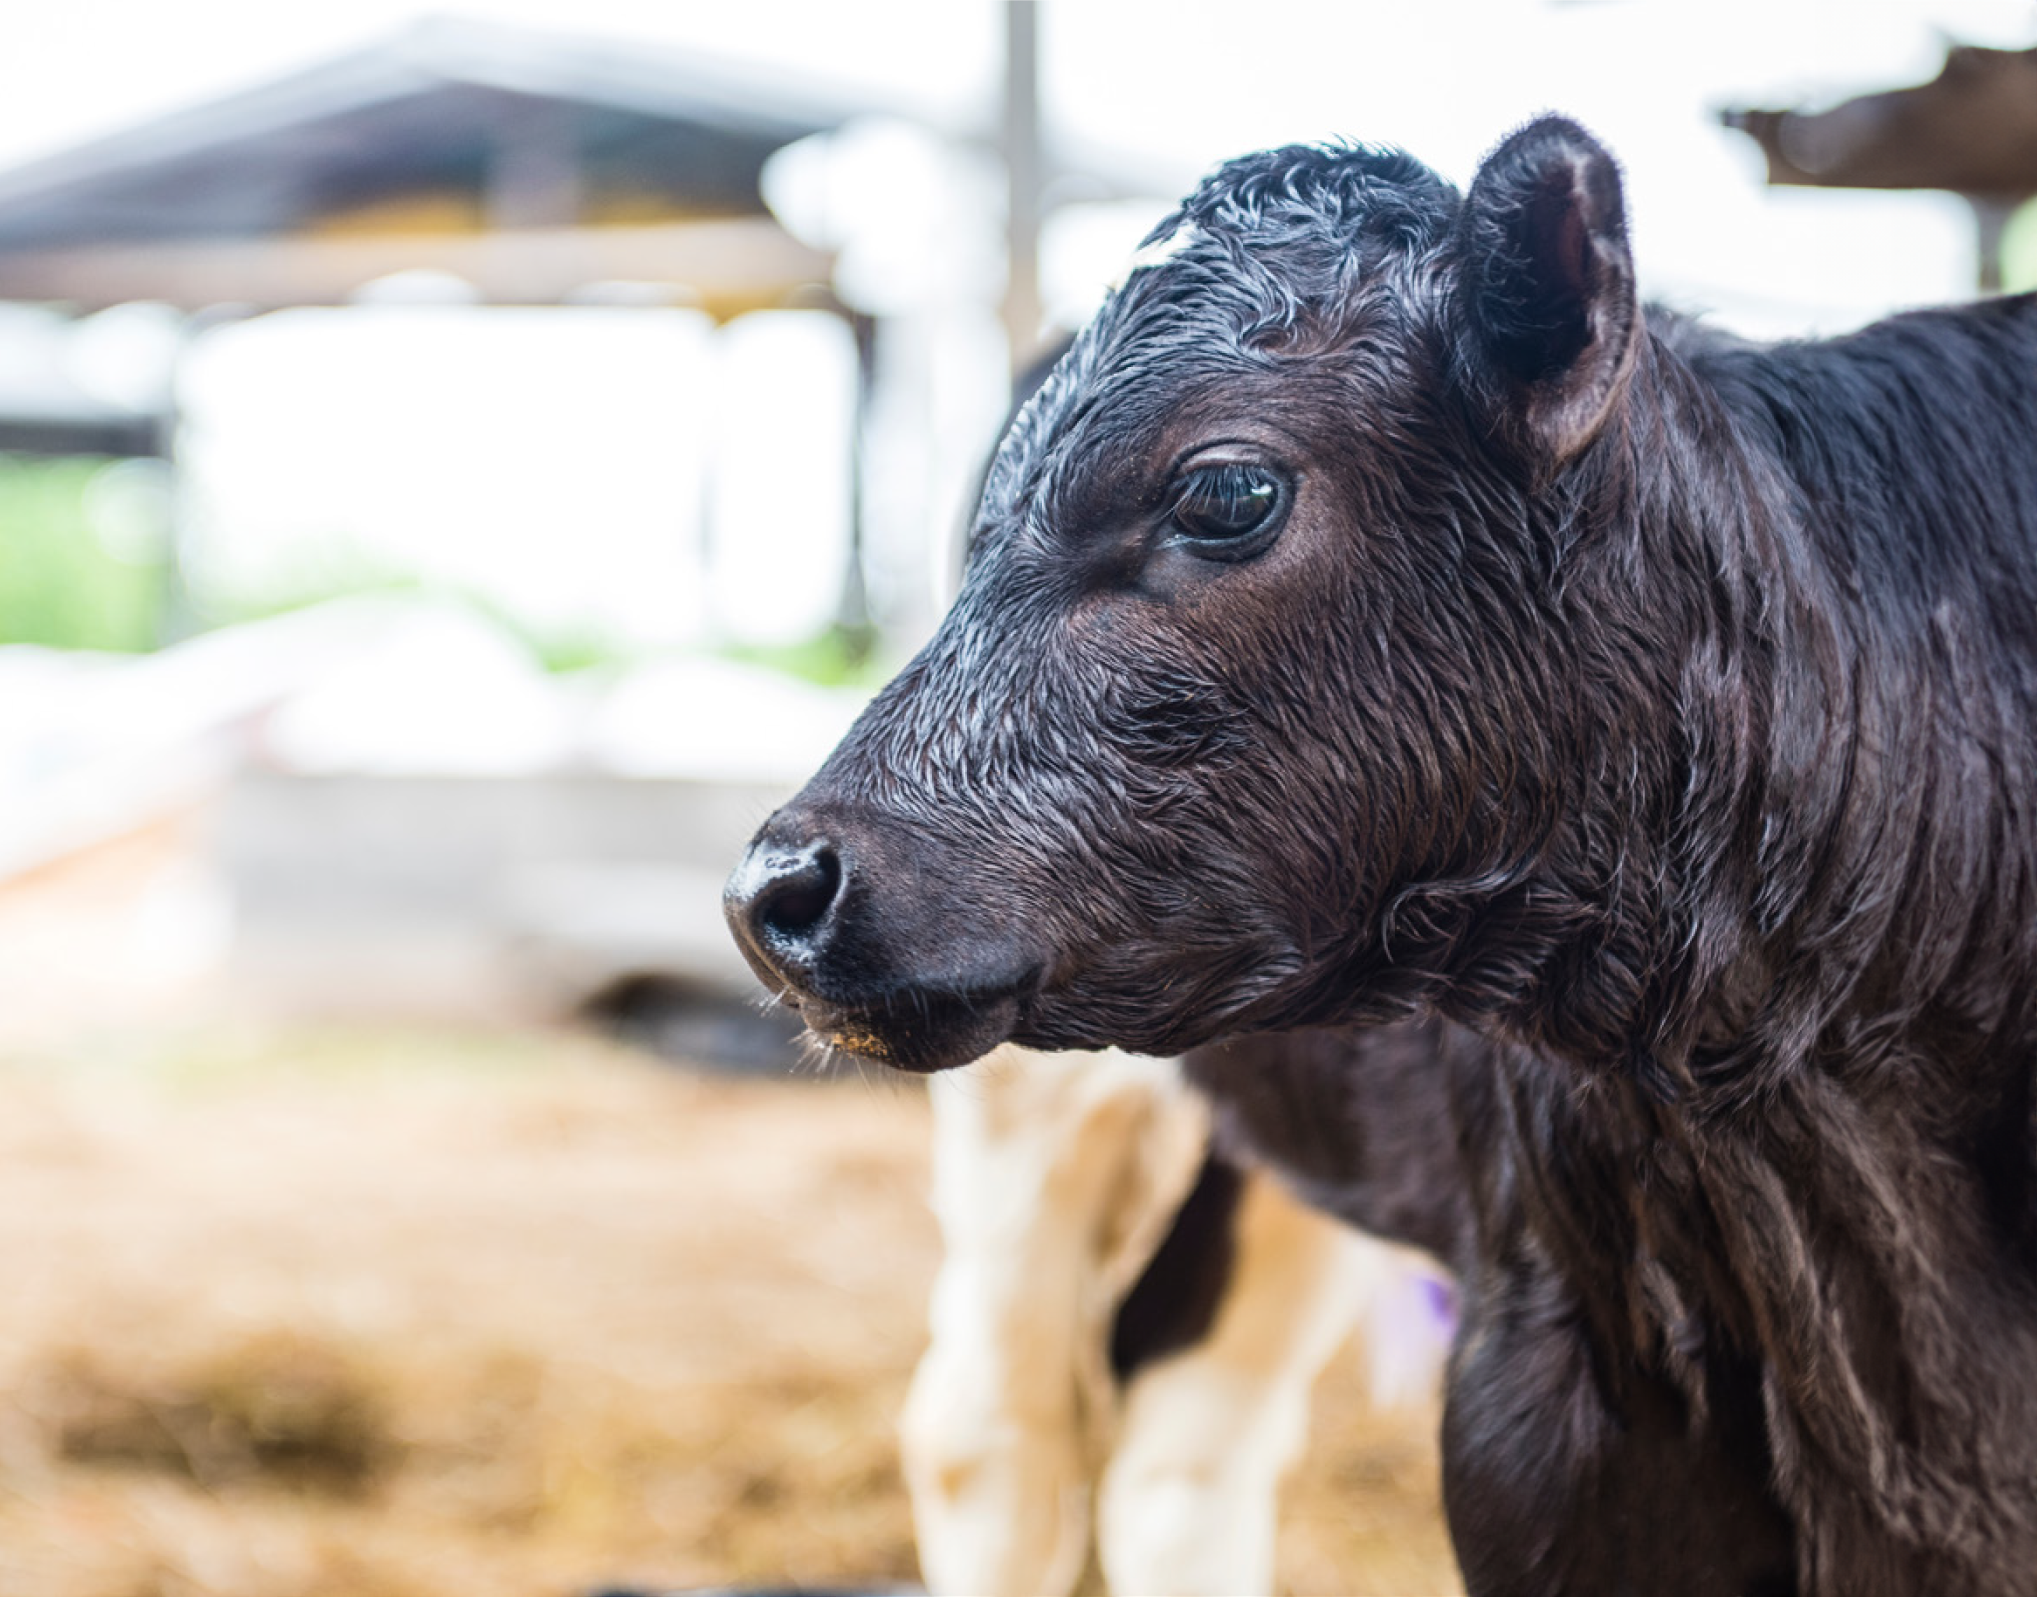 Feeding colostrum as a therapy for diarrhea in preweaned calves